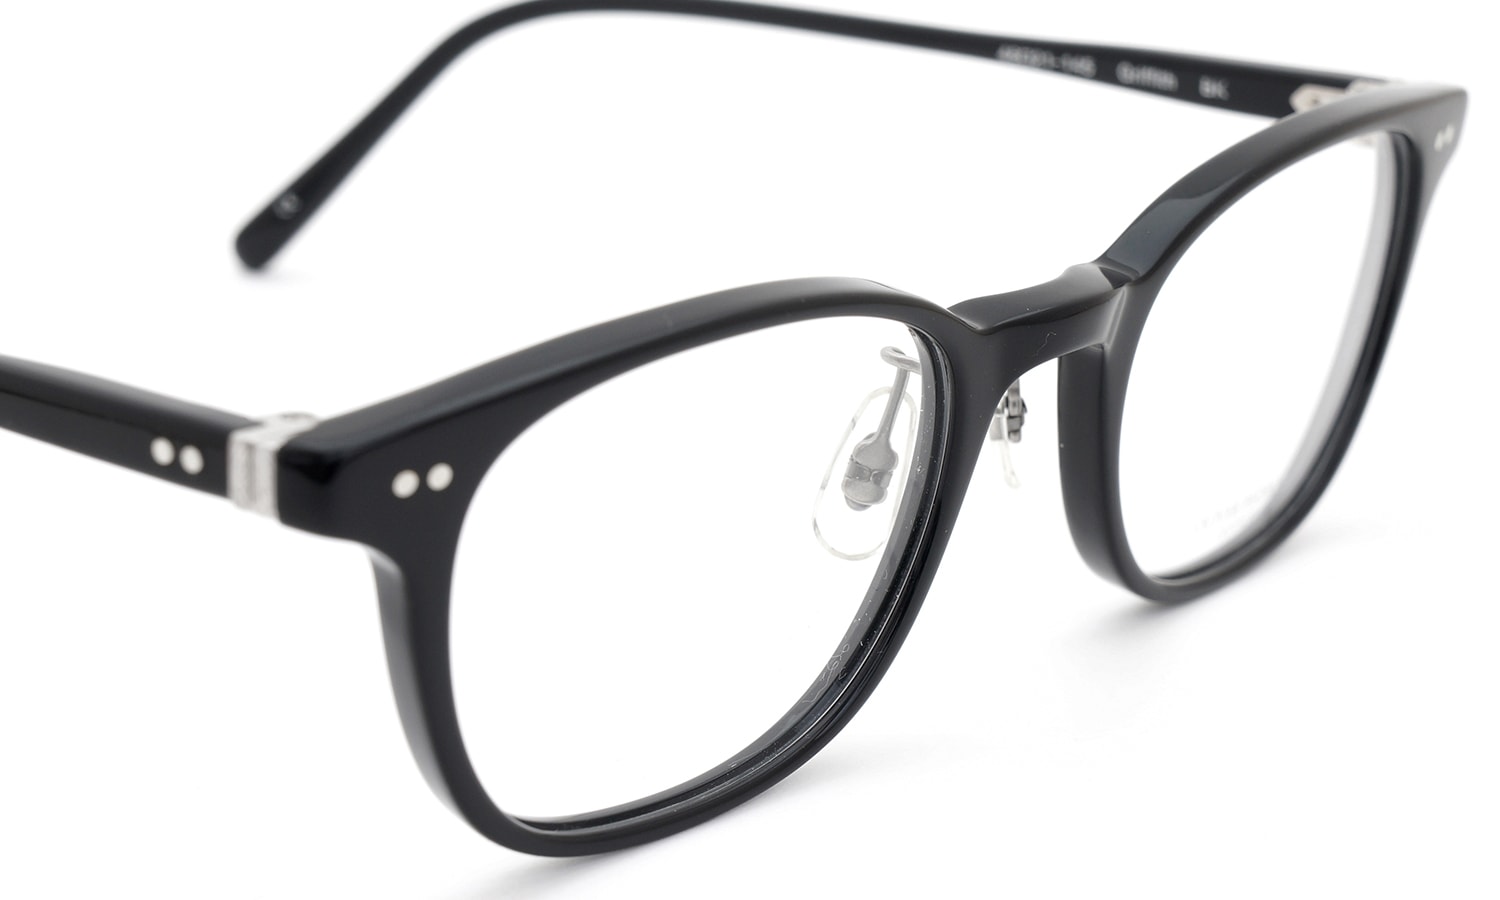 OLIVER PEOPLES Griffith BK